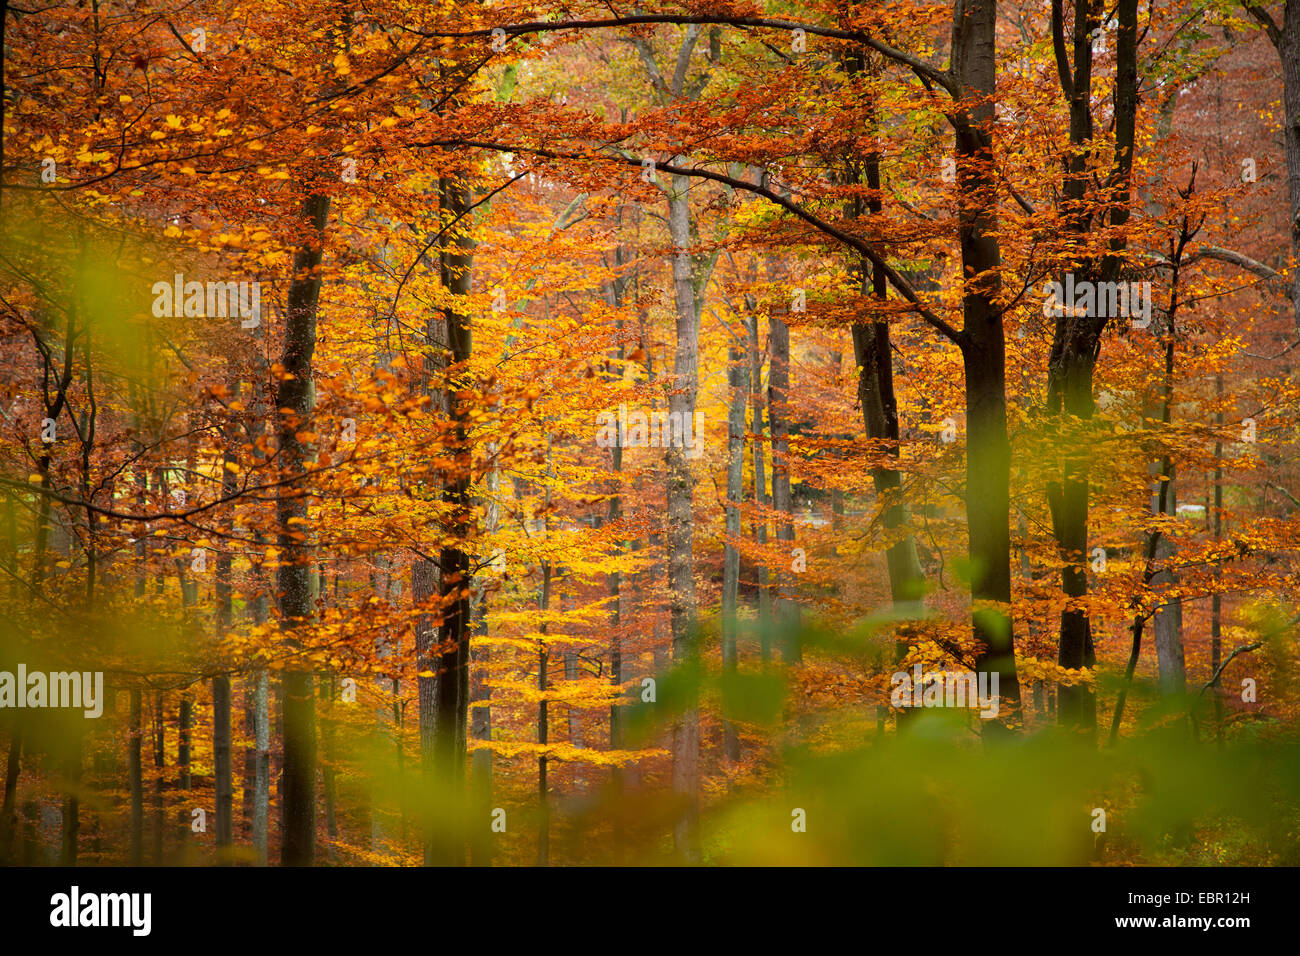 common beech (Fagus sylvatica), mixed forest with beeches in autumn, Germany, Rhineland-Palatinate Stock Photo